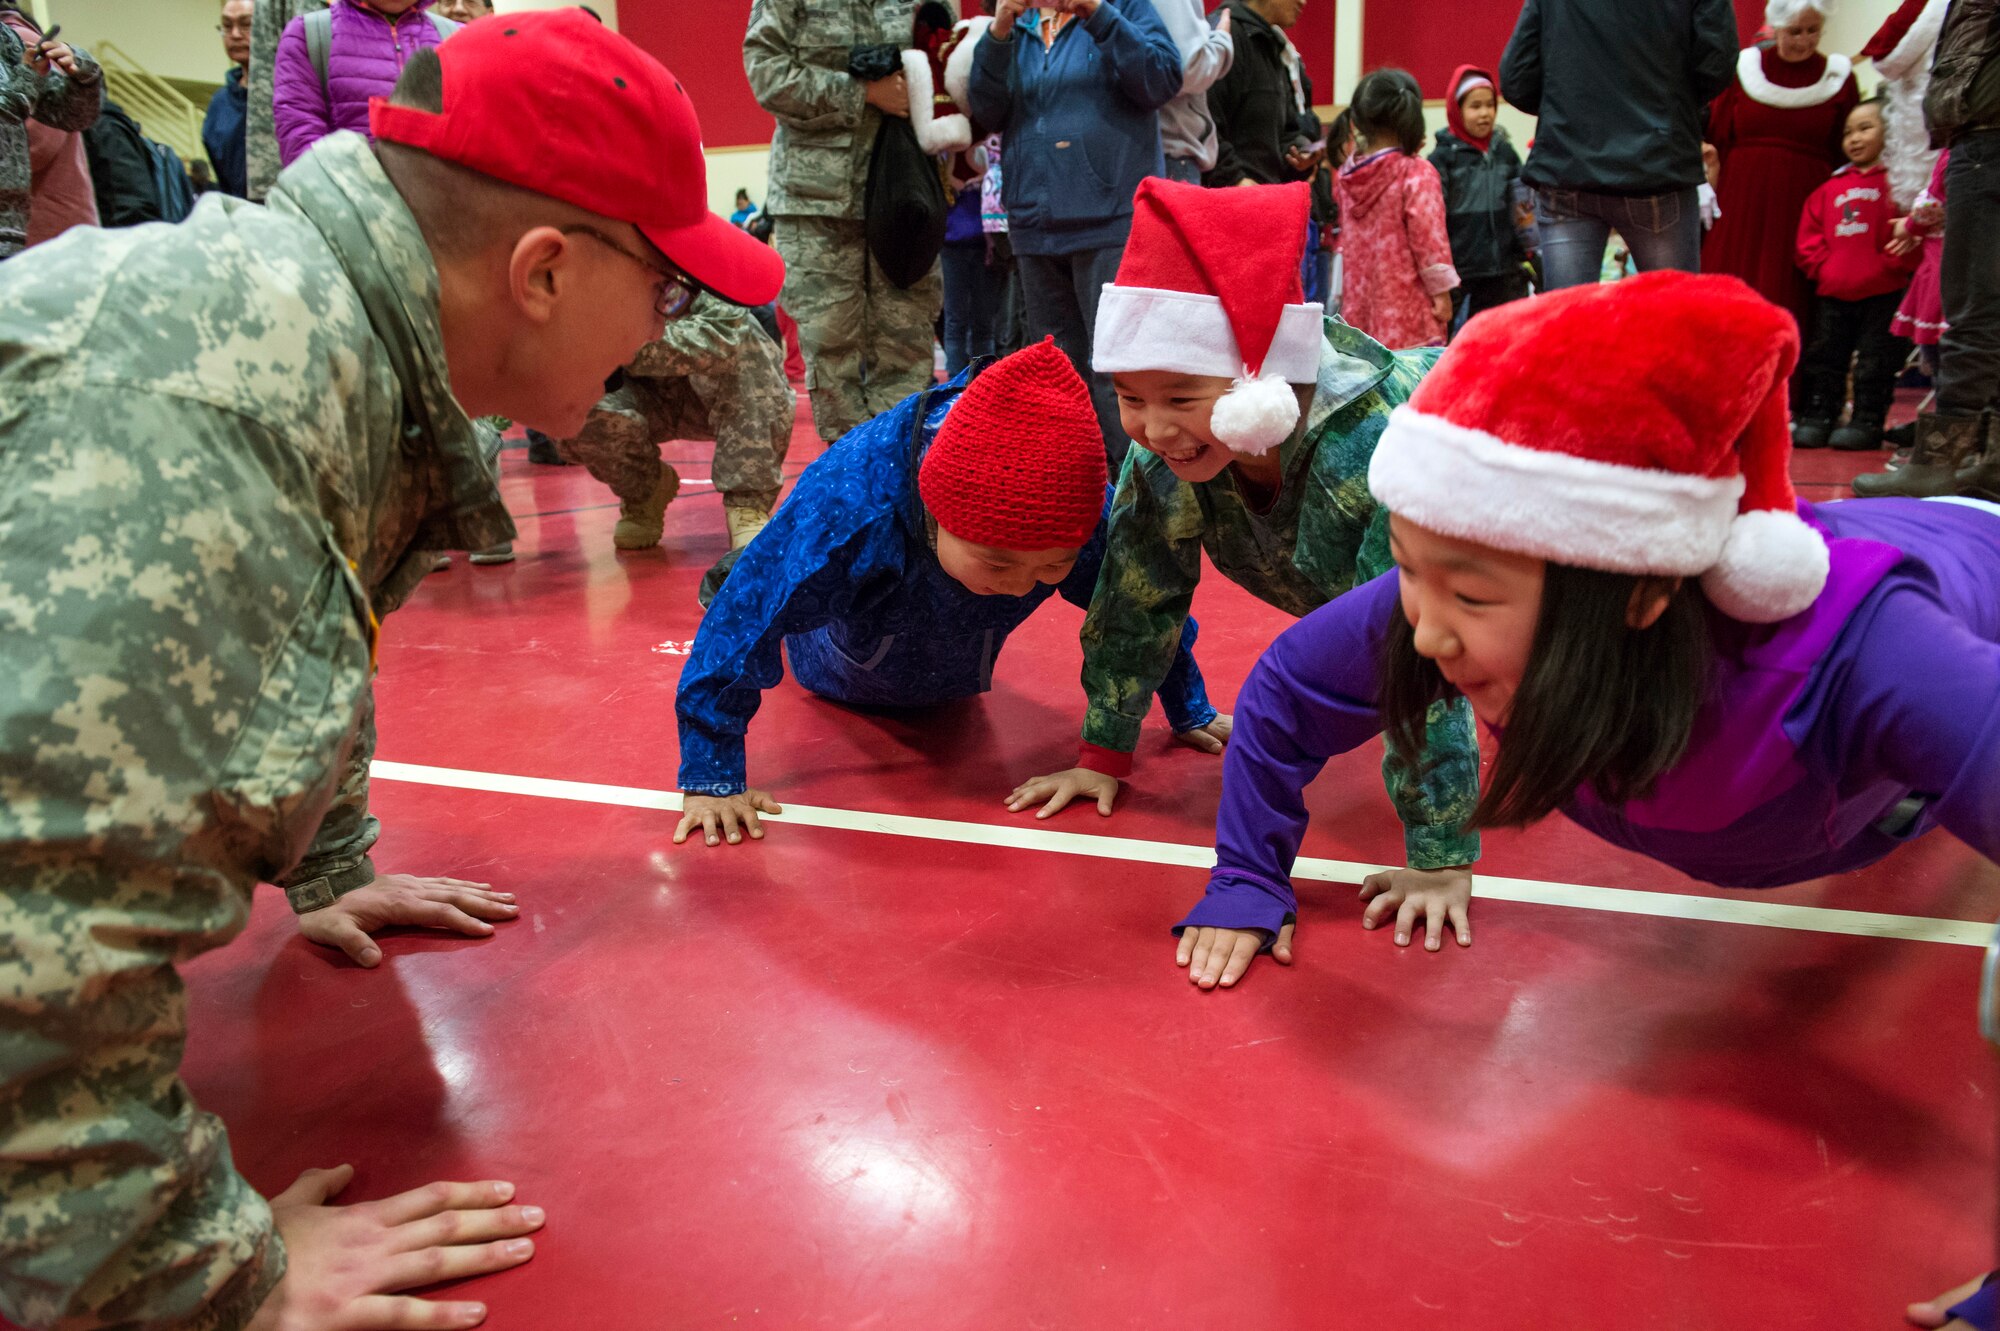 Alaska Army National Guard Spc. Michael Notti does pushups with elementary school children at St. Mary's, Alaska, during Operation Santa Claus, Dec. 5, 2015. This year marks the 59th year of the program, during which volunteers from approximately 30 groups and organizations came together to bring holiday cheer to underserved, remote communities across Alaska. (U.S. Air Force photo/Alejandro Pena)